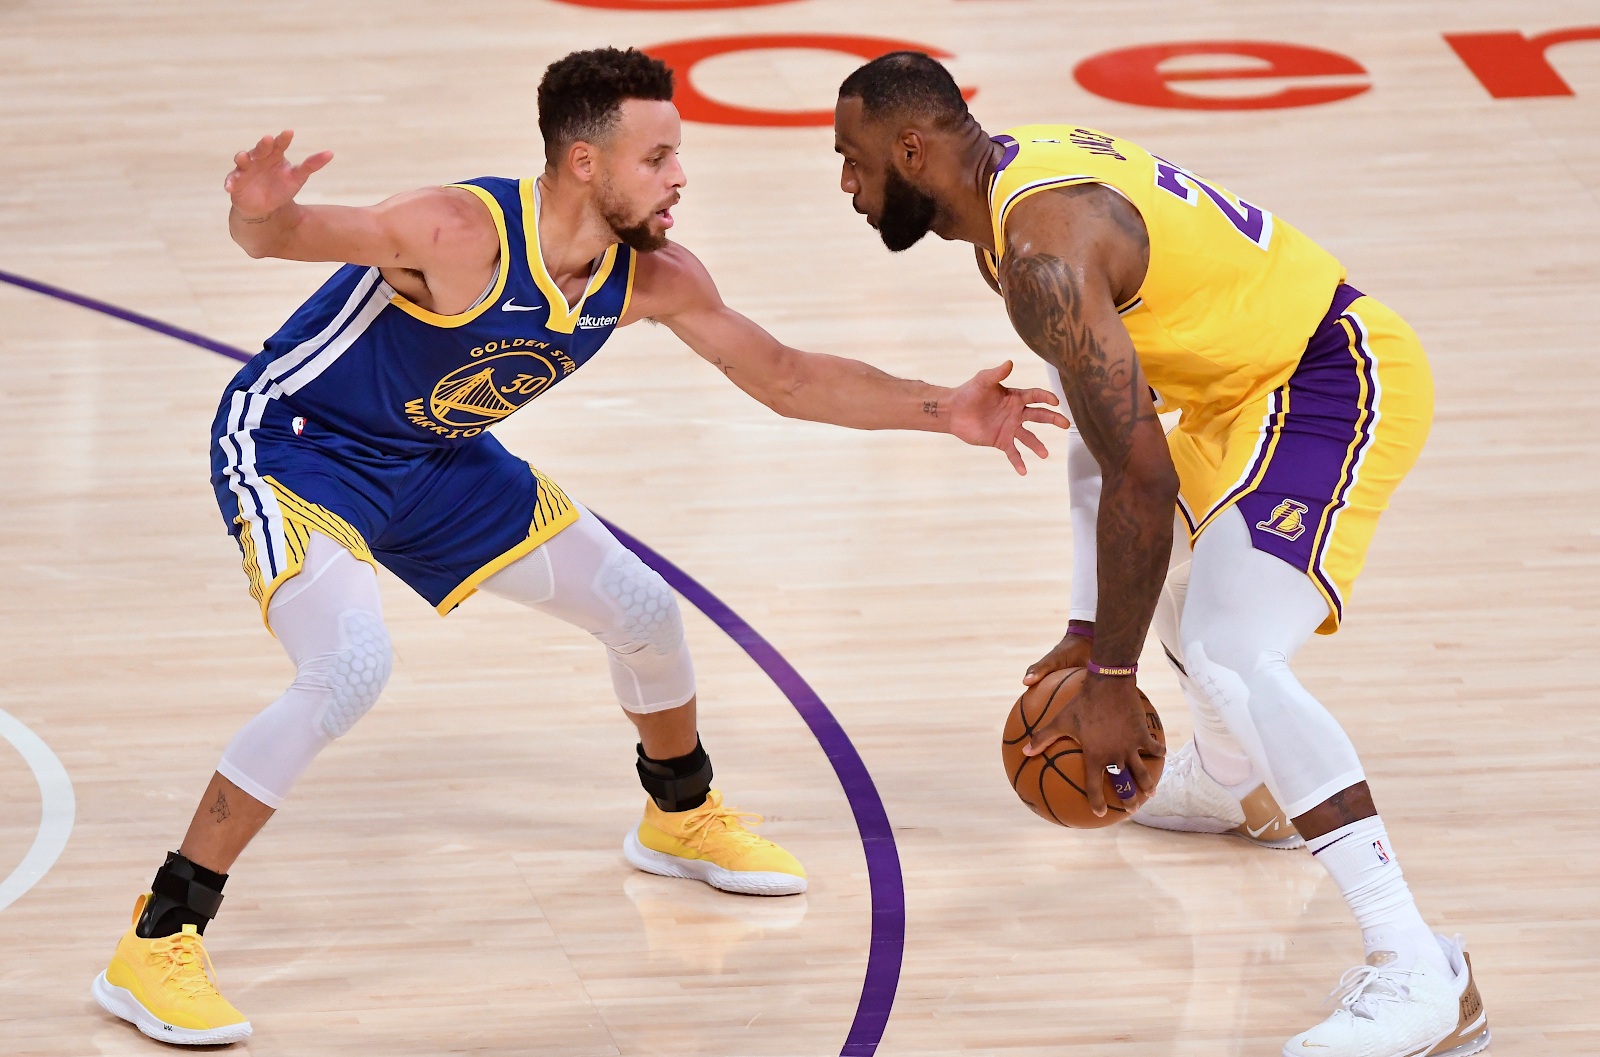 Golden State Warriors Vs Los Angeles Lakers – NBA GAME DAY PREVIEW: 02.28.2021